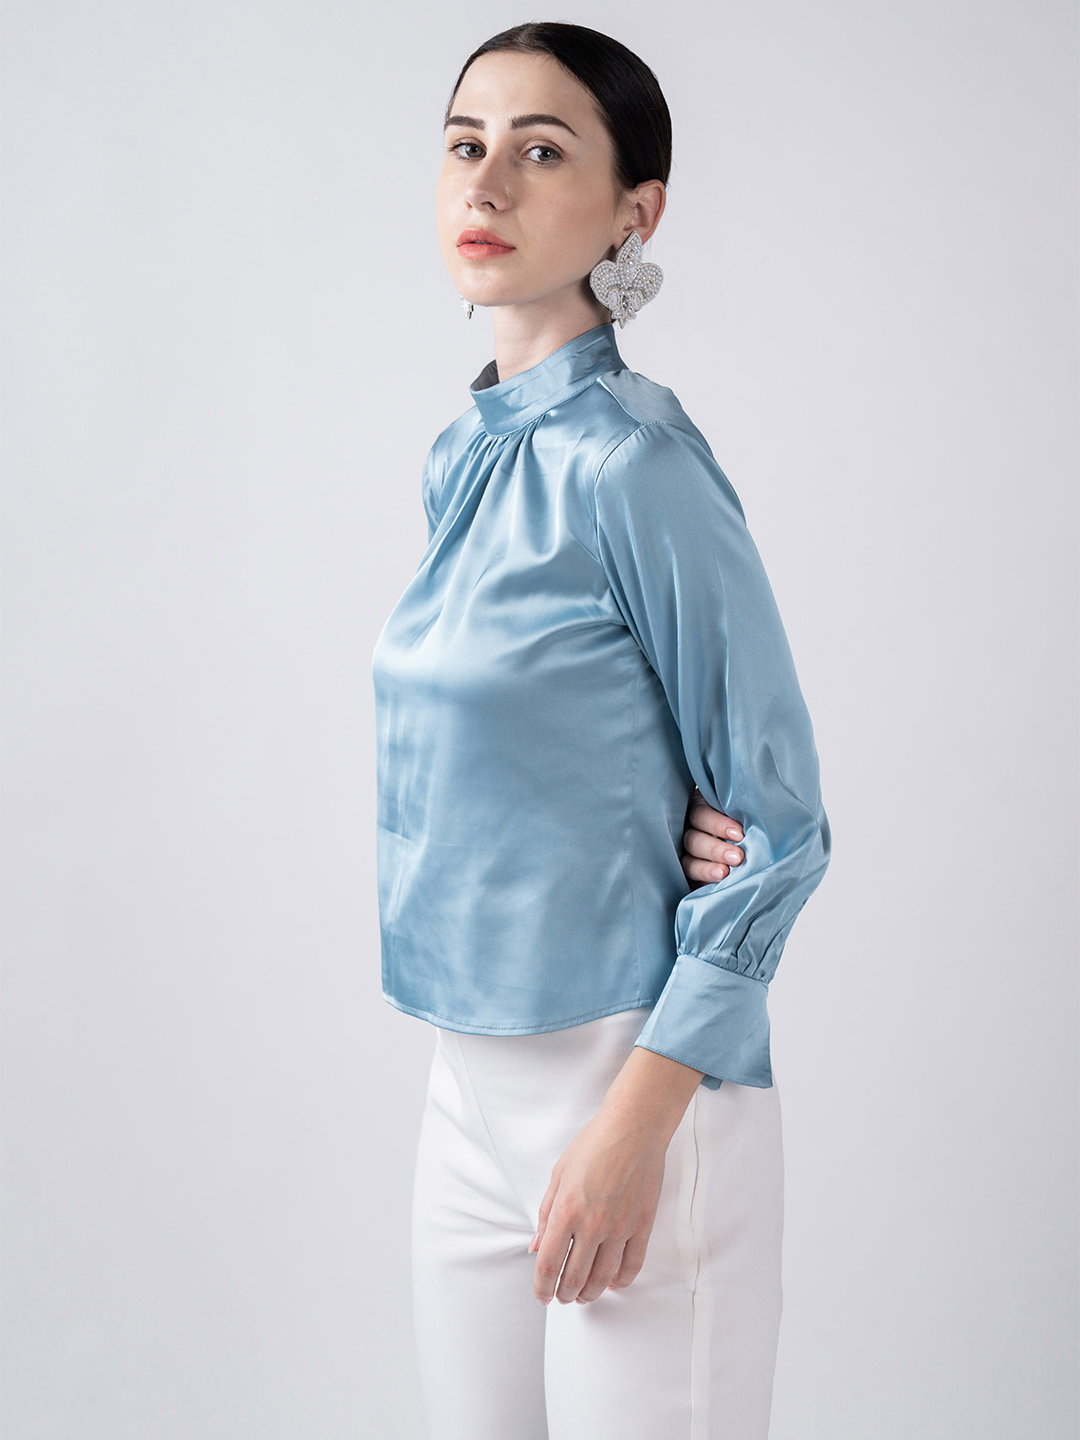 Gathered Collared Top Mint Blue -4